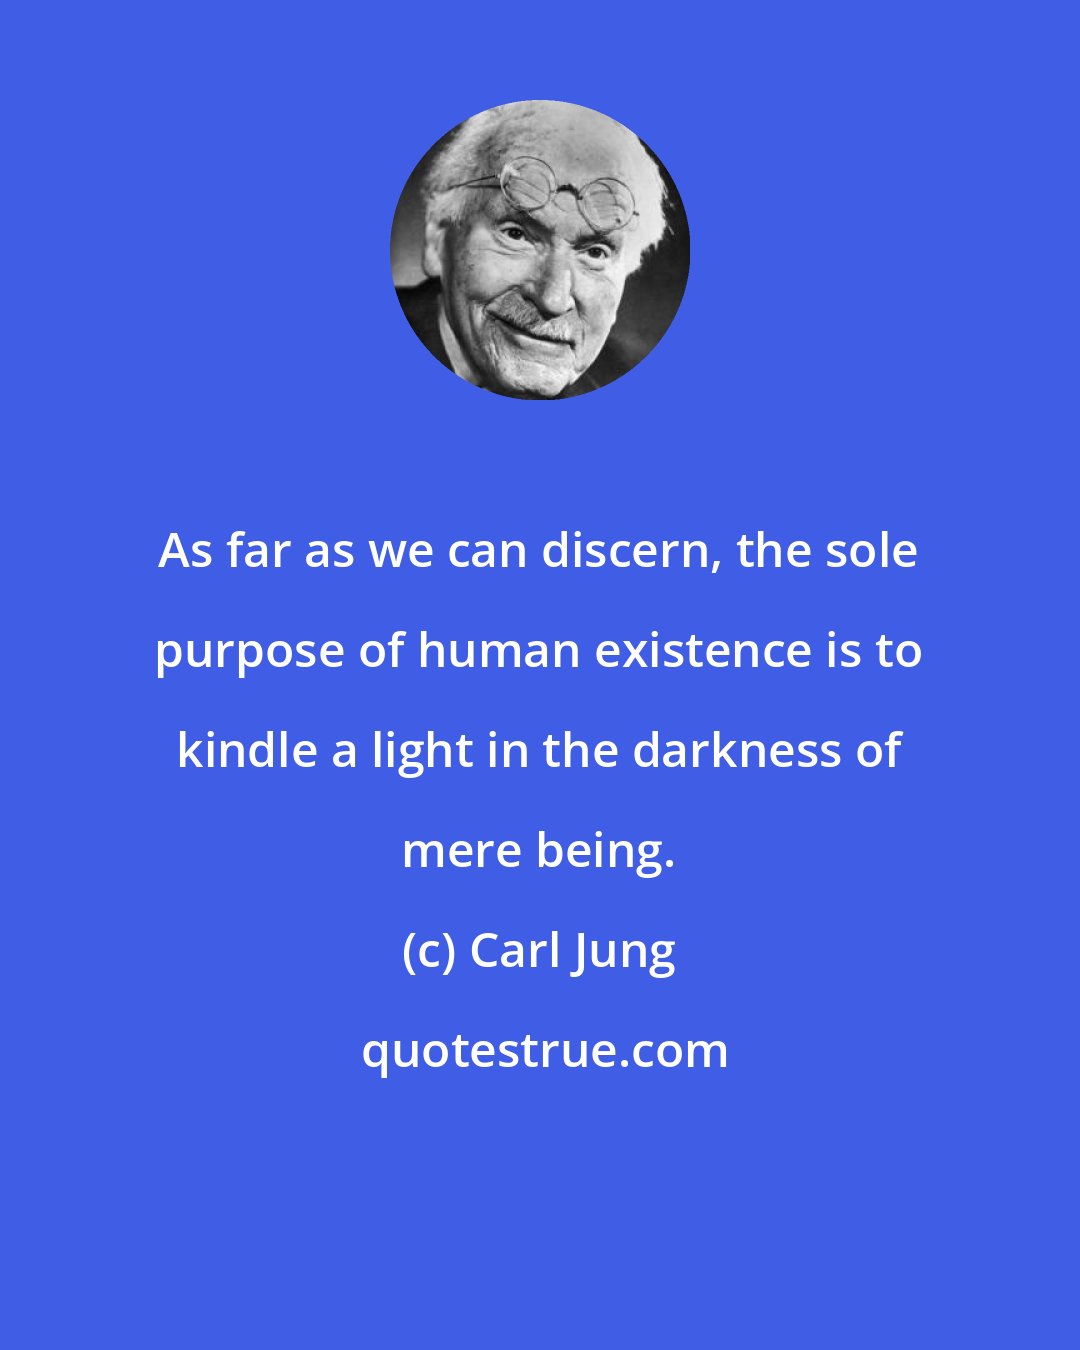 Carl Jung: As far as we can discern, the sole purpose of human existence is to kindle a light in the darkness of mere being.